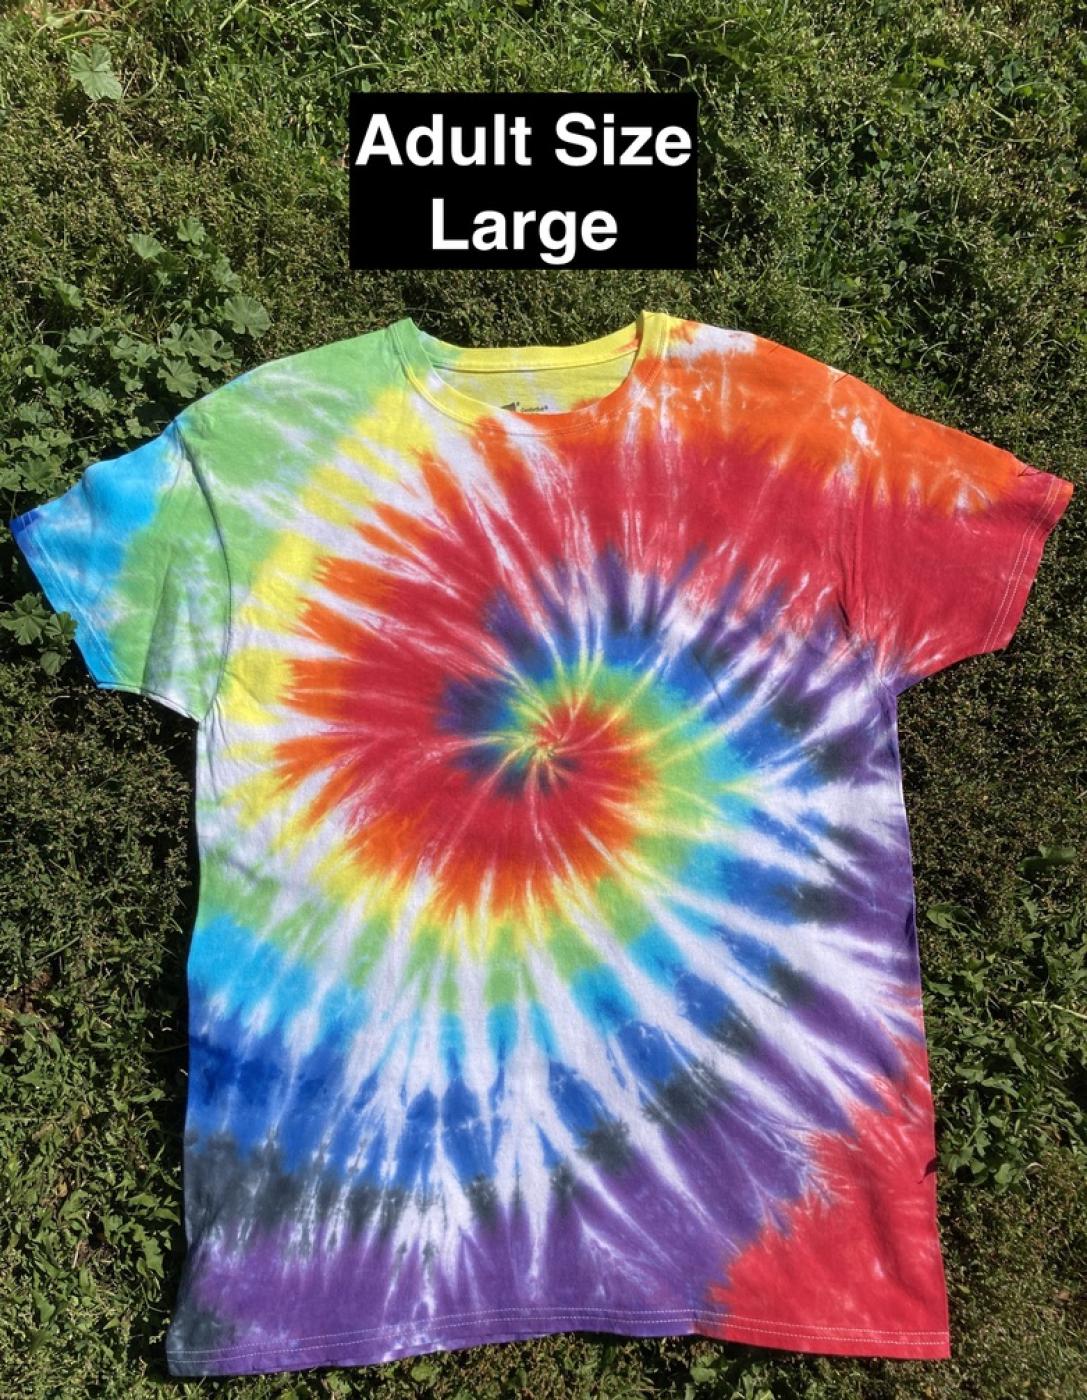 Rainbow Spiral White Accents Tie Dye T-Shirt Adult Large